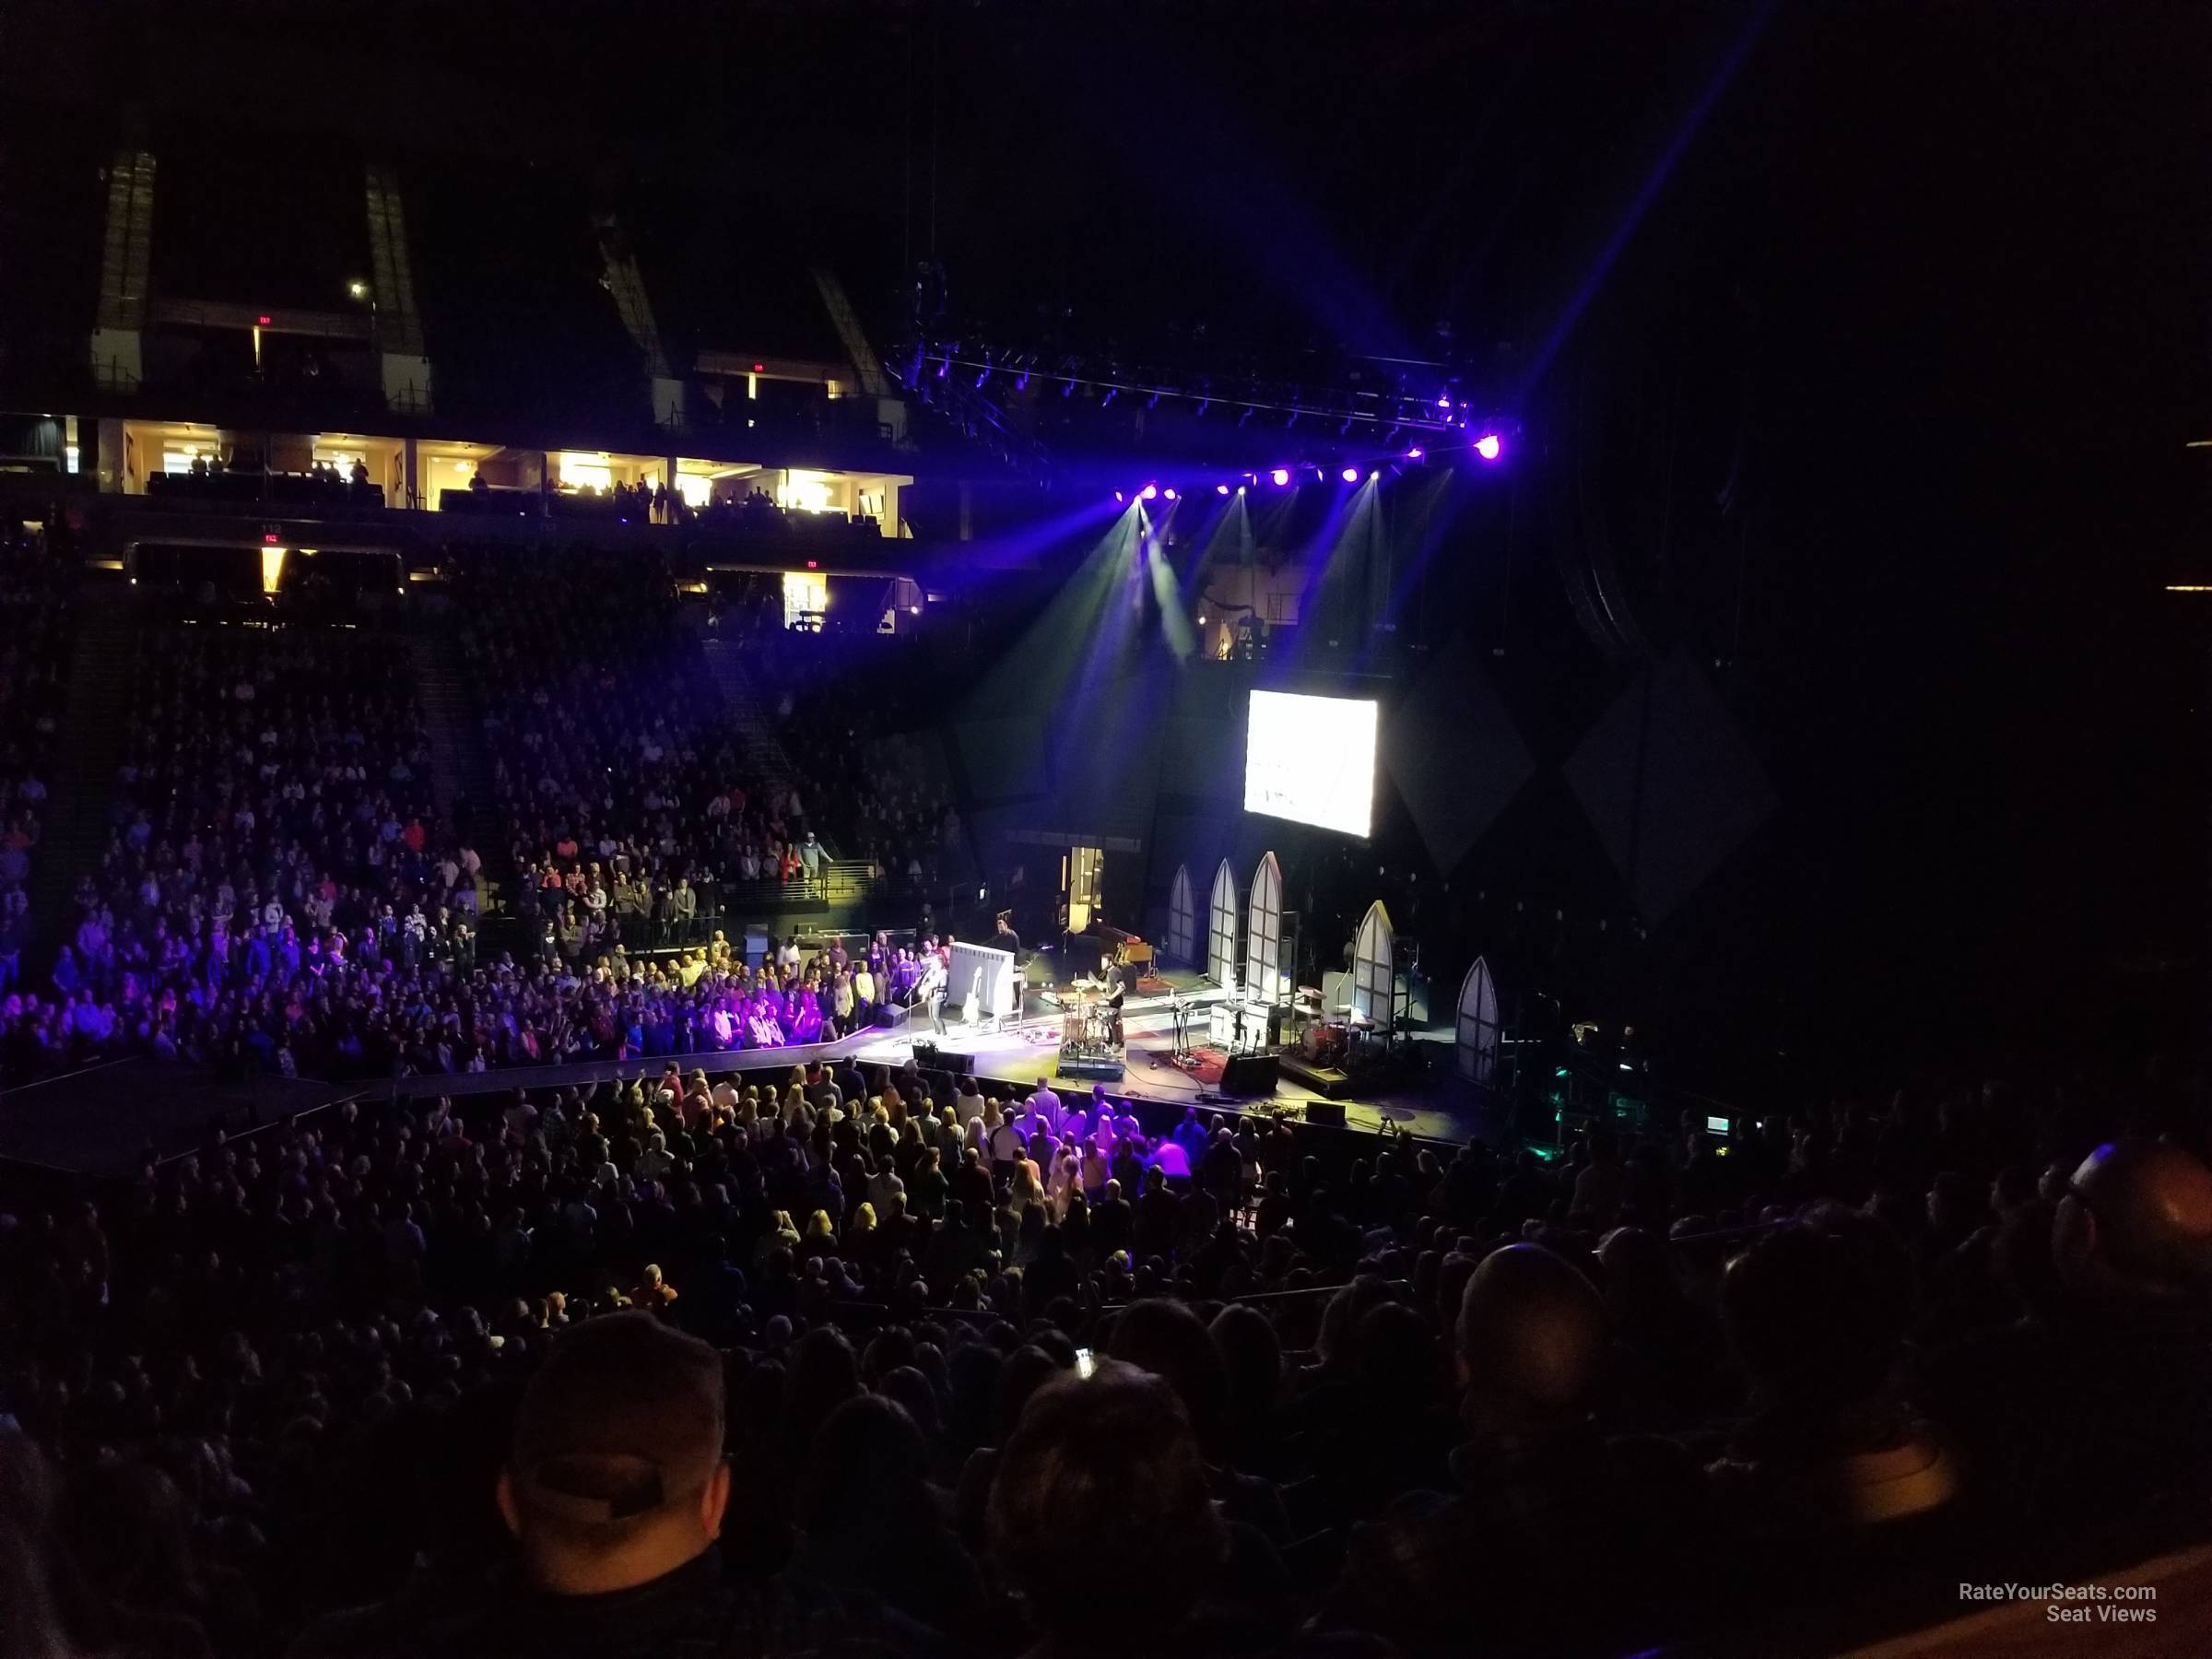 Section 130 at Target Center for Concerts - RateYourSeats.com